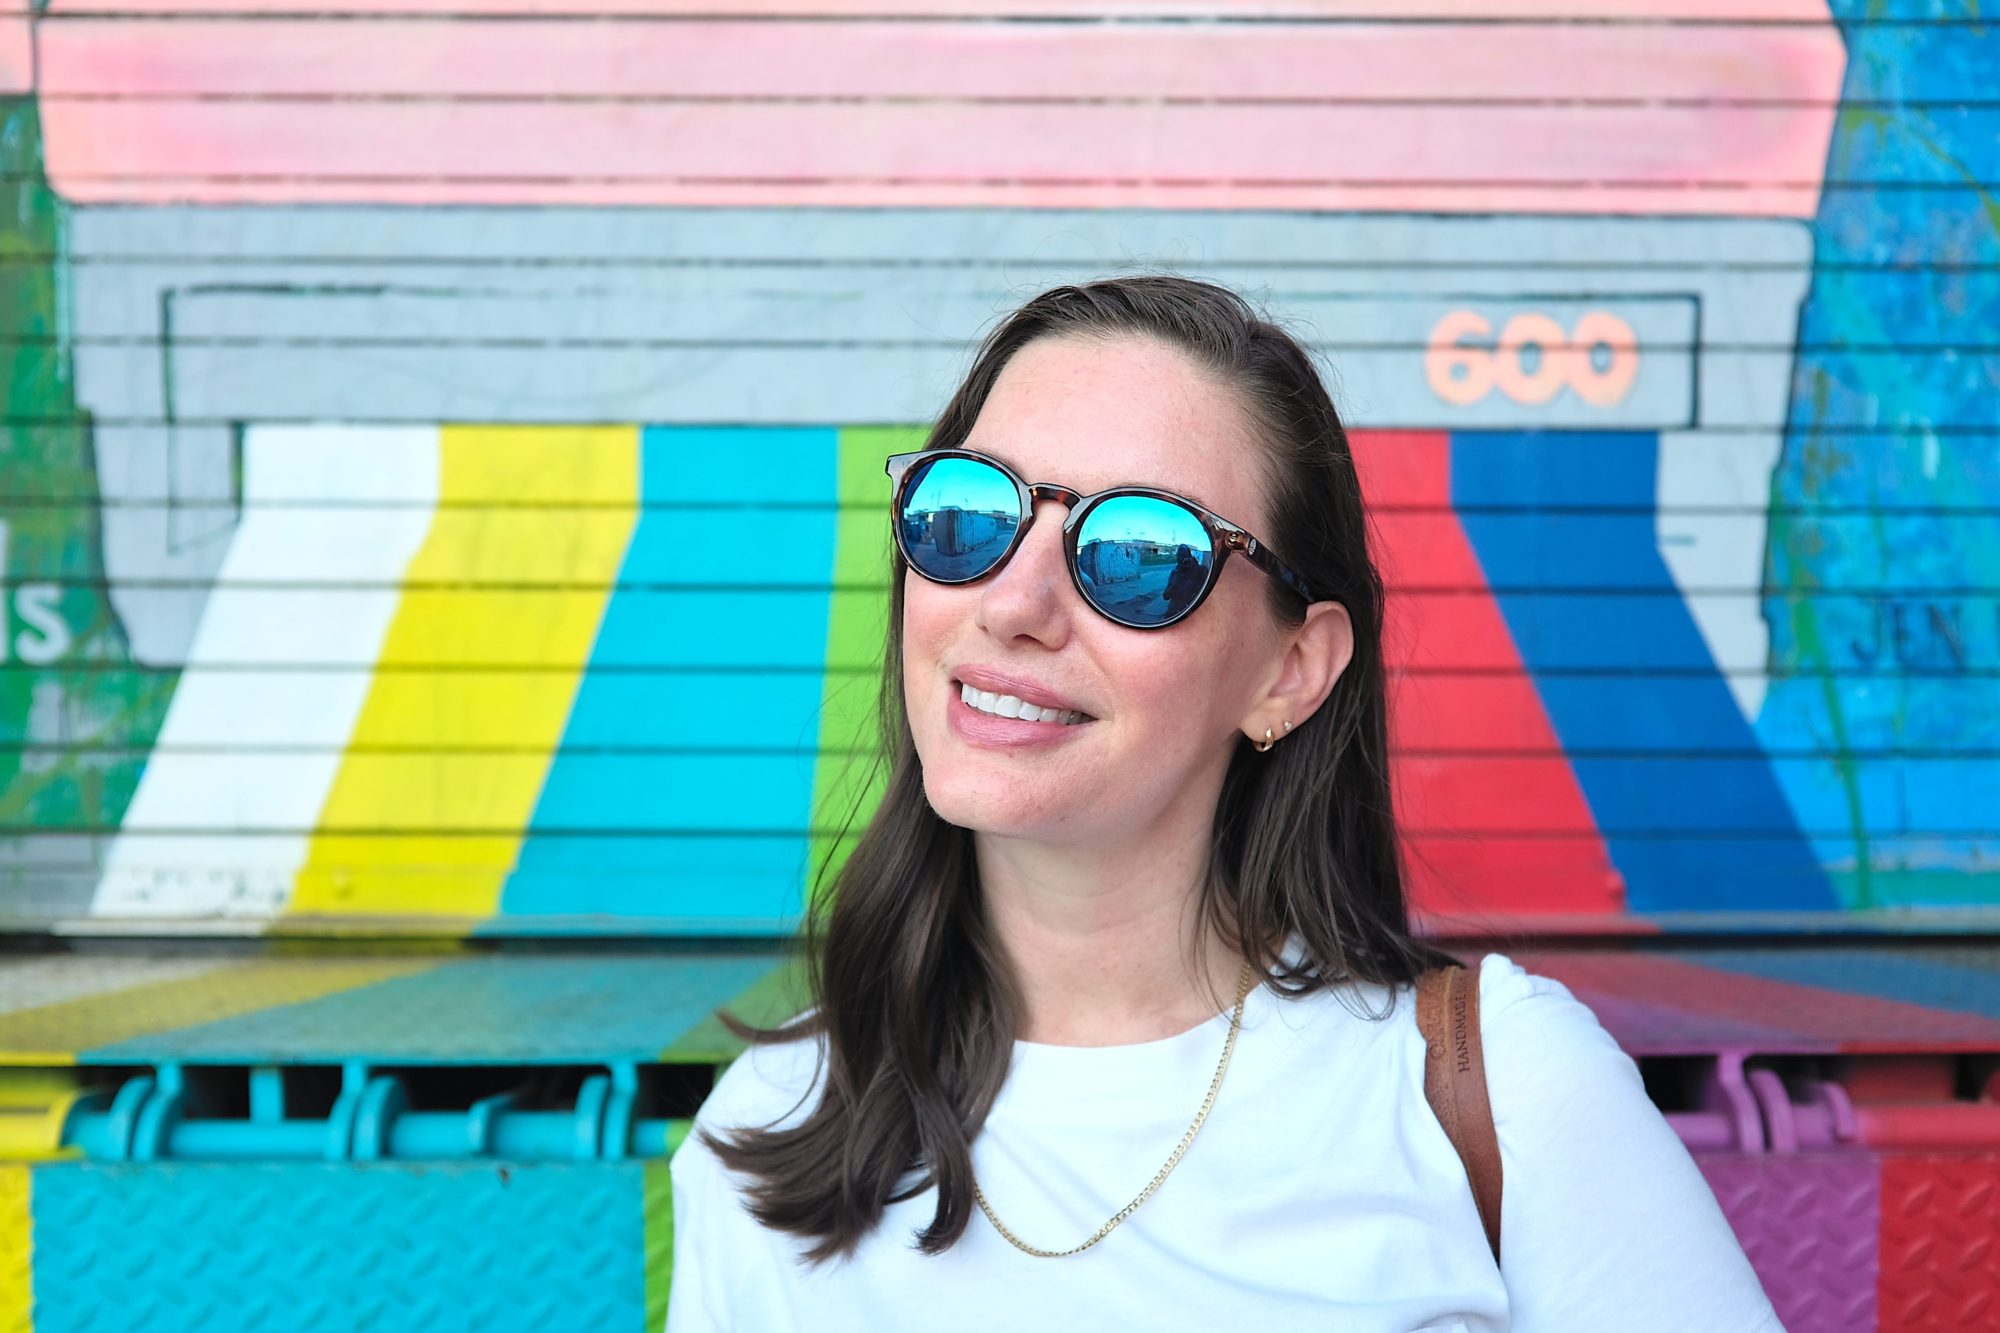 Alyssa wears the Sunski Dipsea sunglasses in front of a colorful background